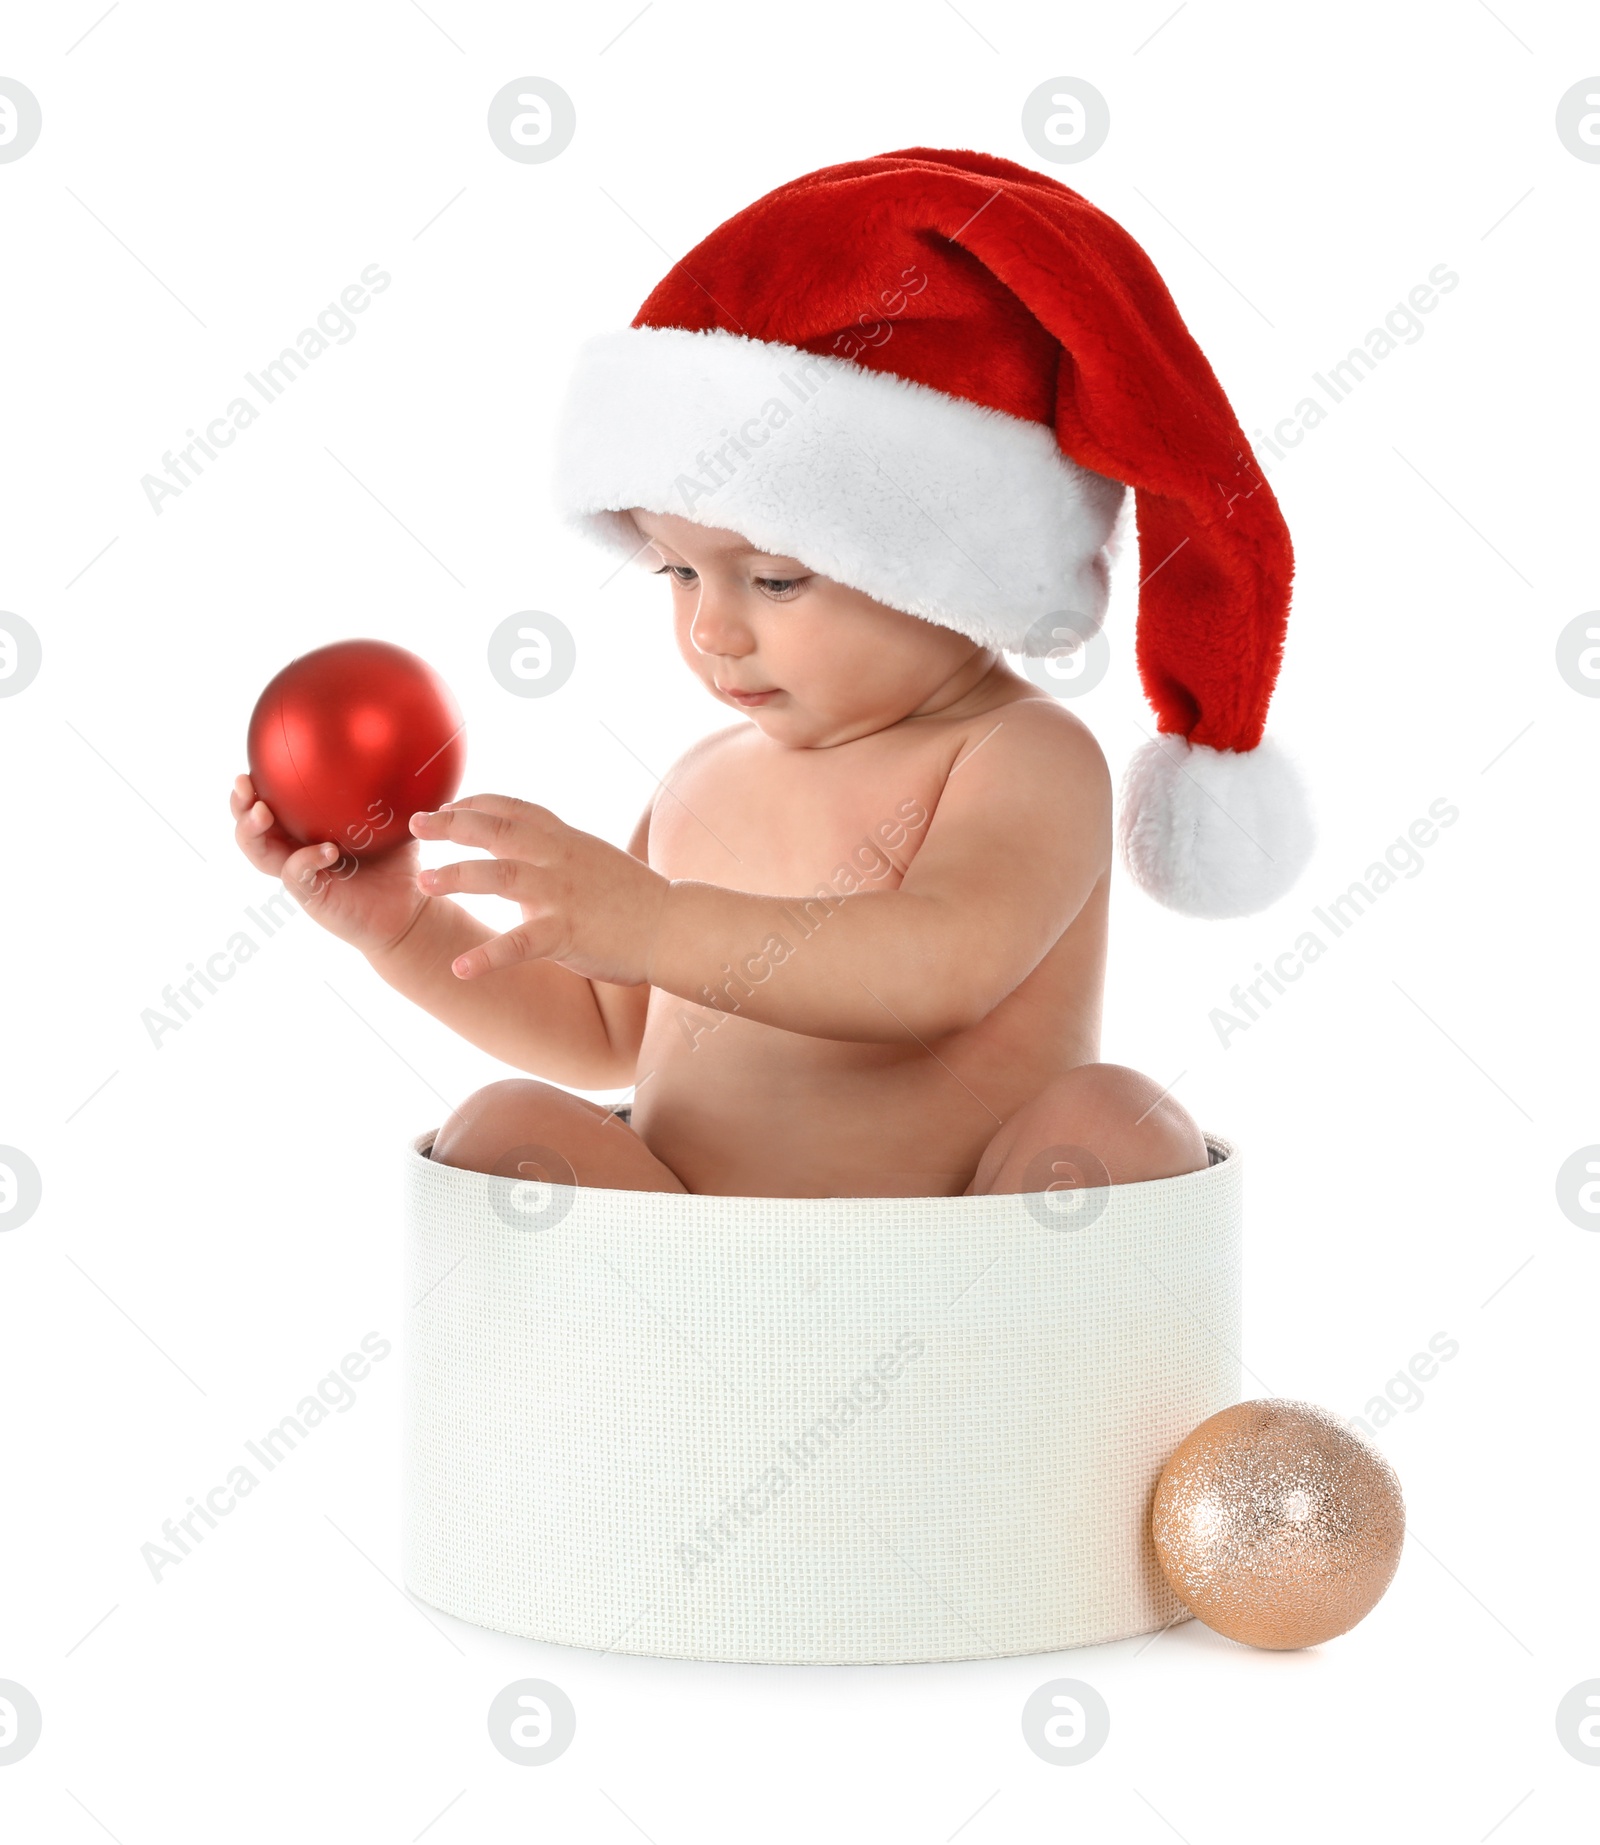 Photo of Cute little baby wearing Santa hat sitting in box with Christmas decorations on white background